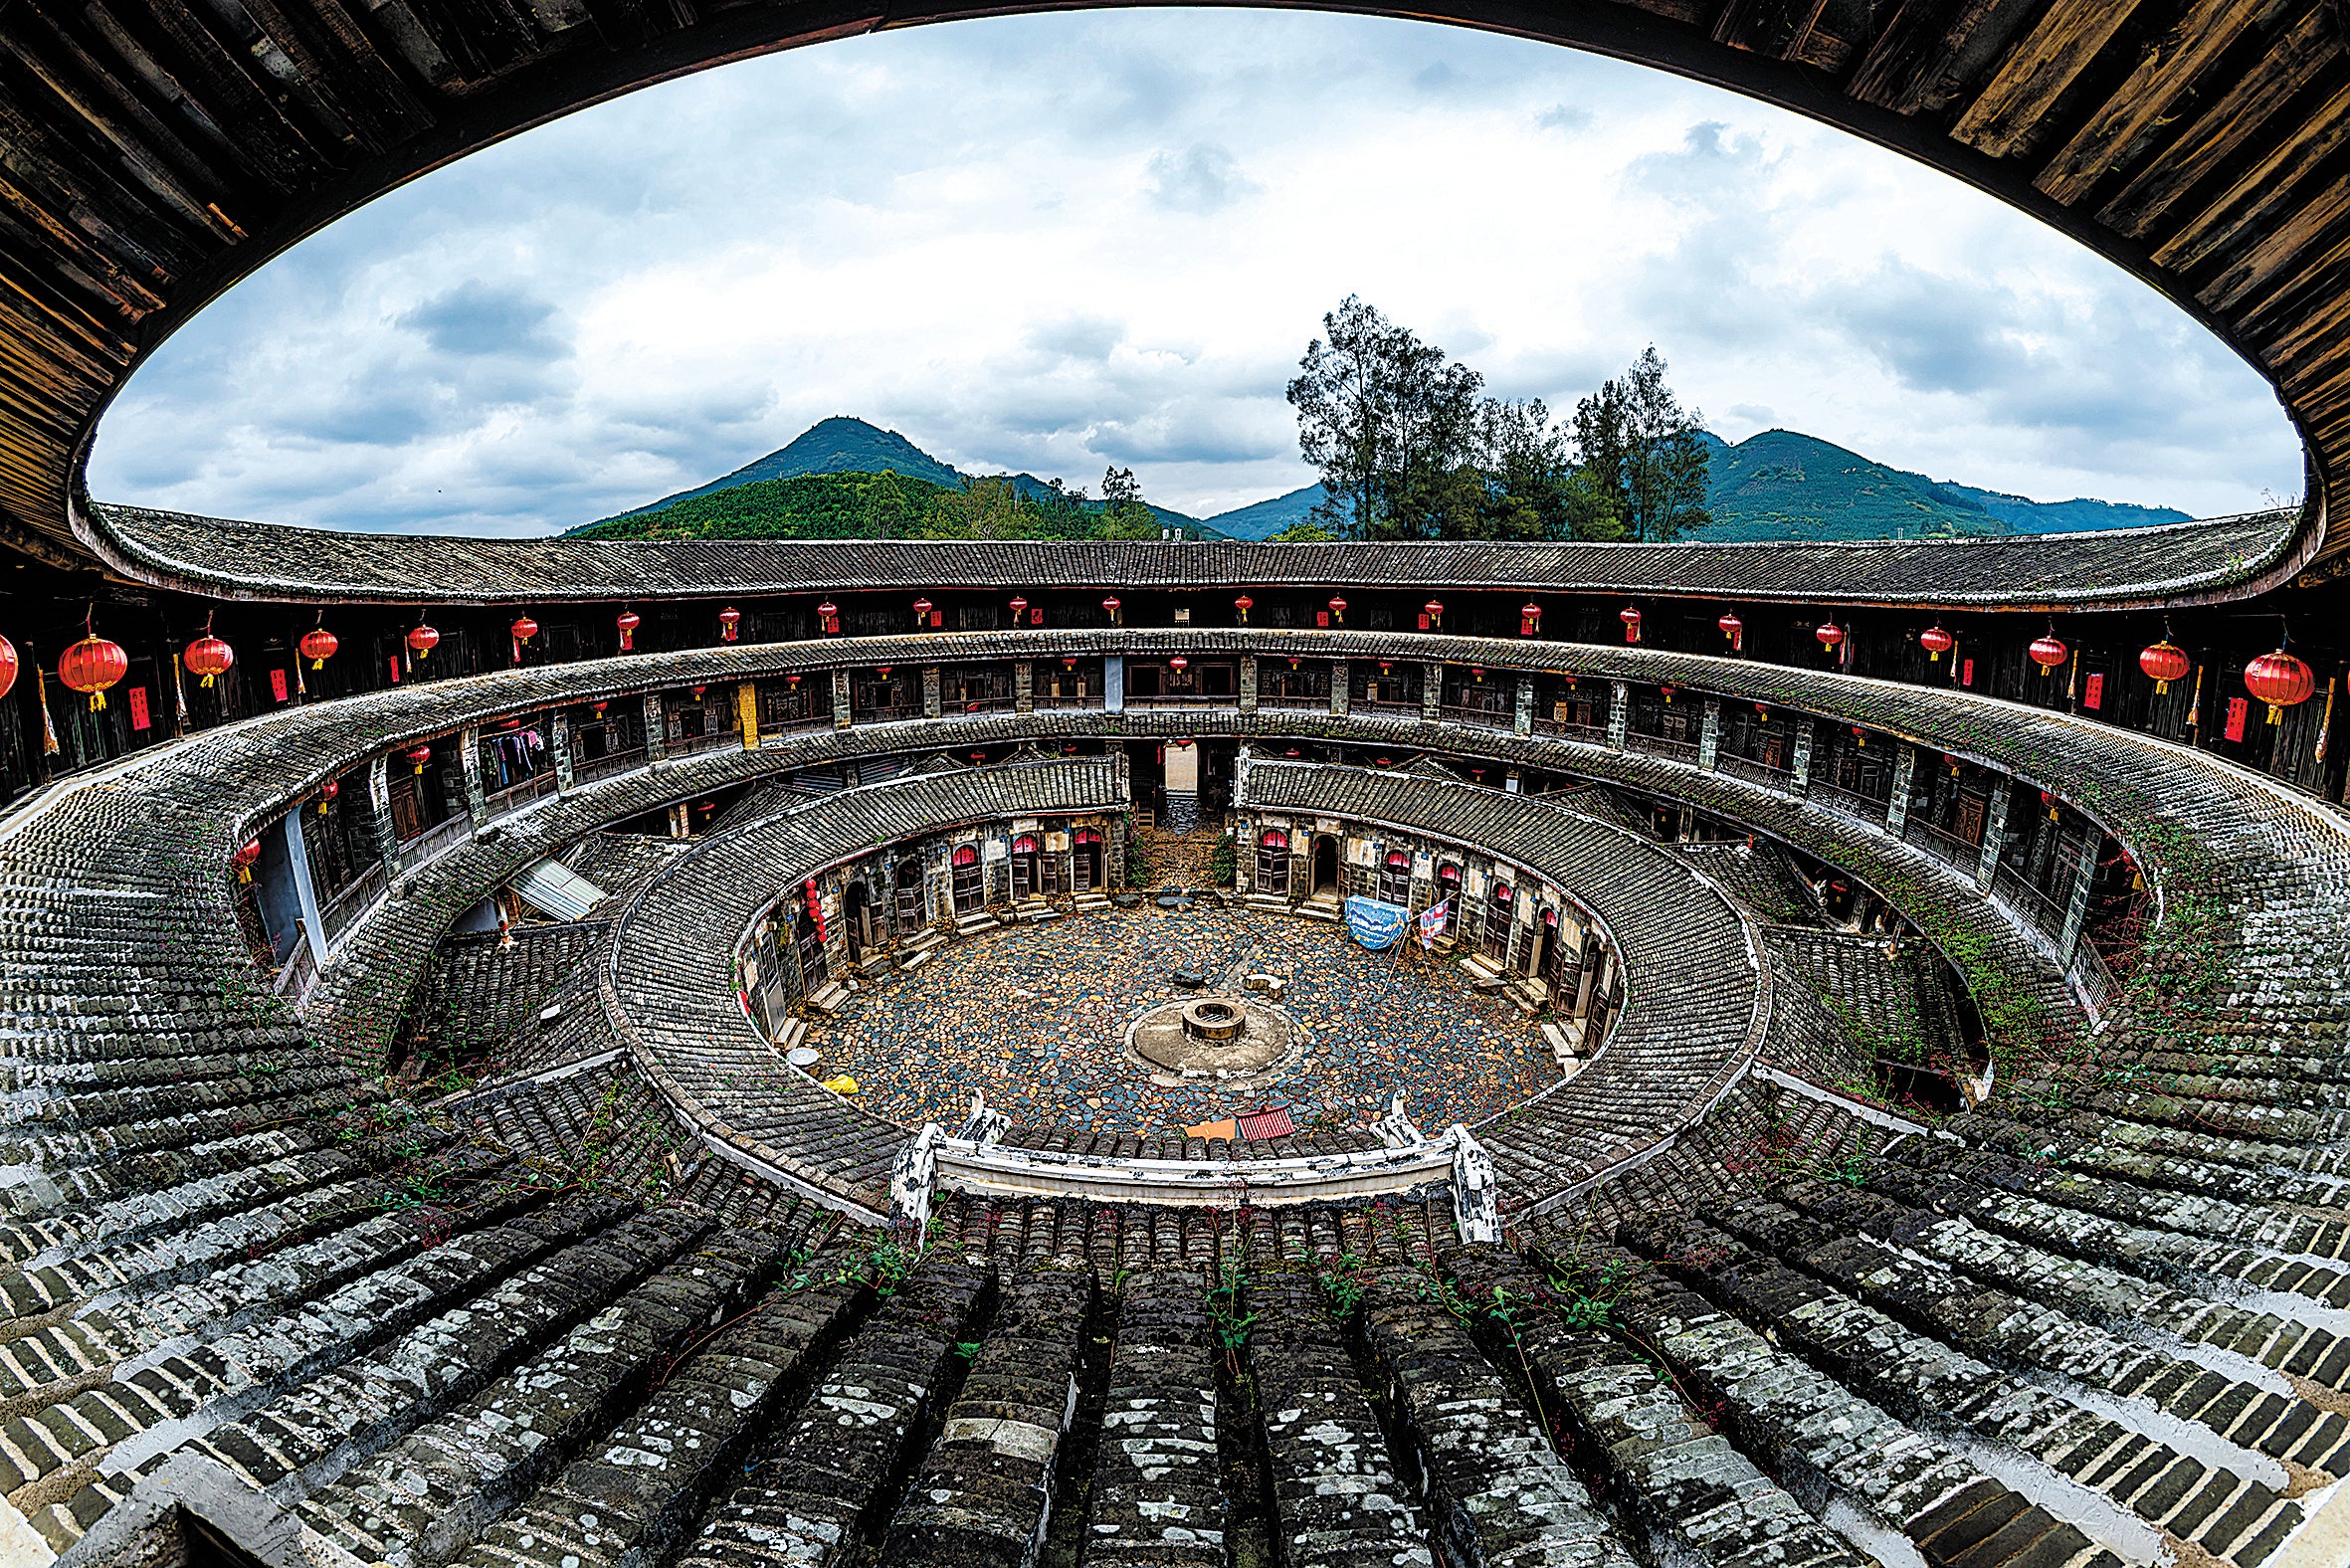 A tulou in suburban Zhangzhou city, which used to be isolated from the outside world, is now a popular tourist attraction in Fujian province